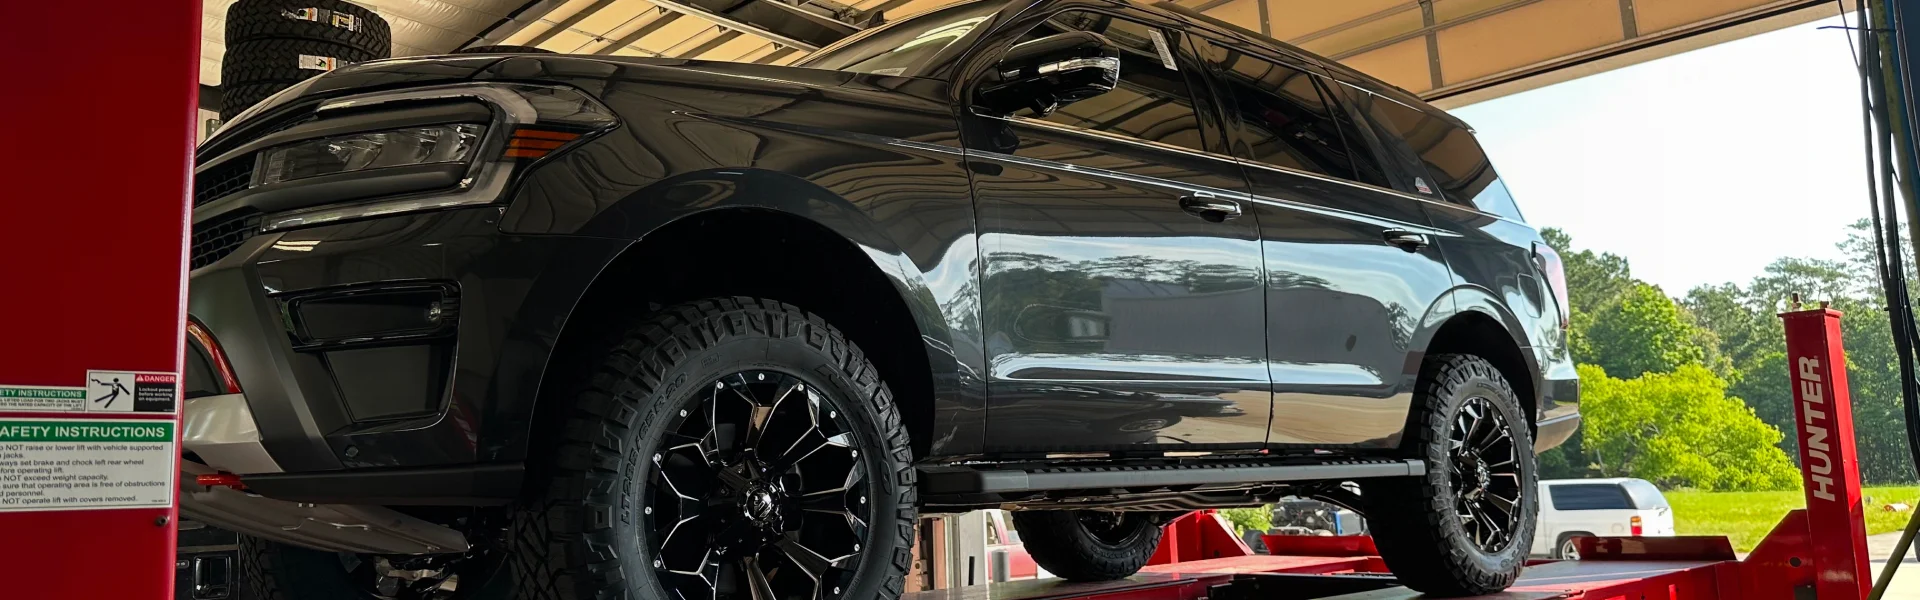 Elevate your ride with Custom Tires and Wheels from Texas Truck Works in The Woodlands